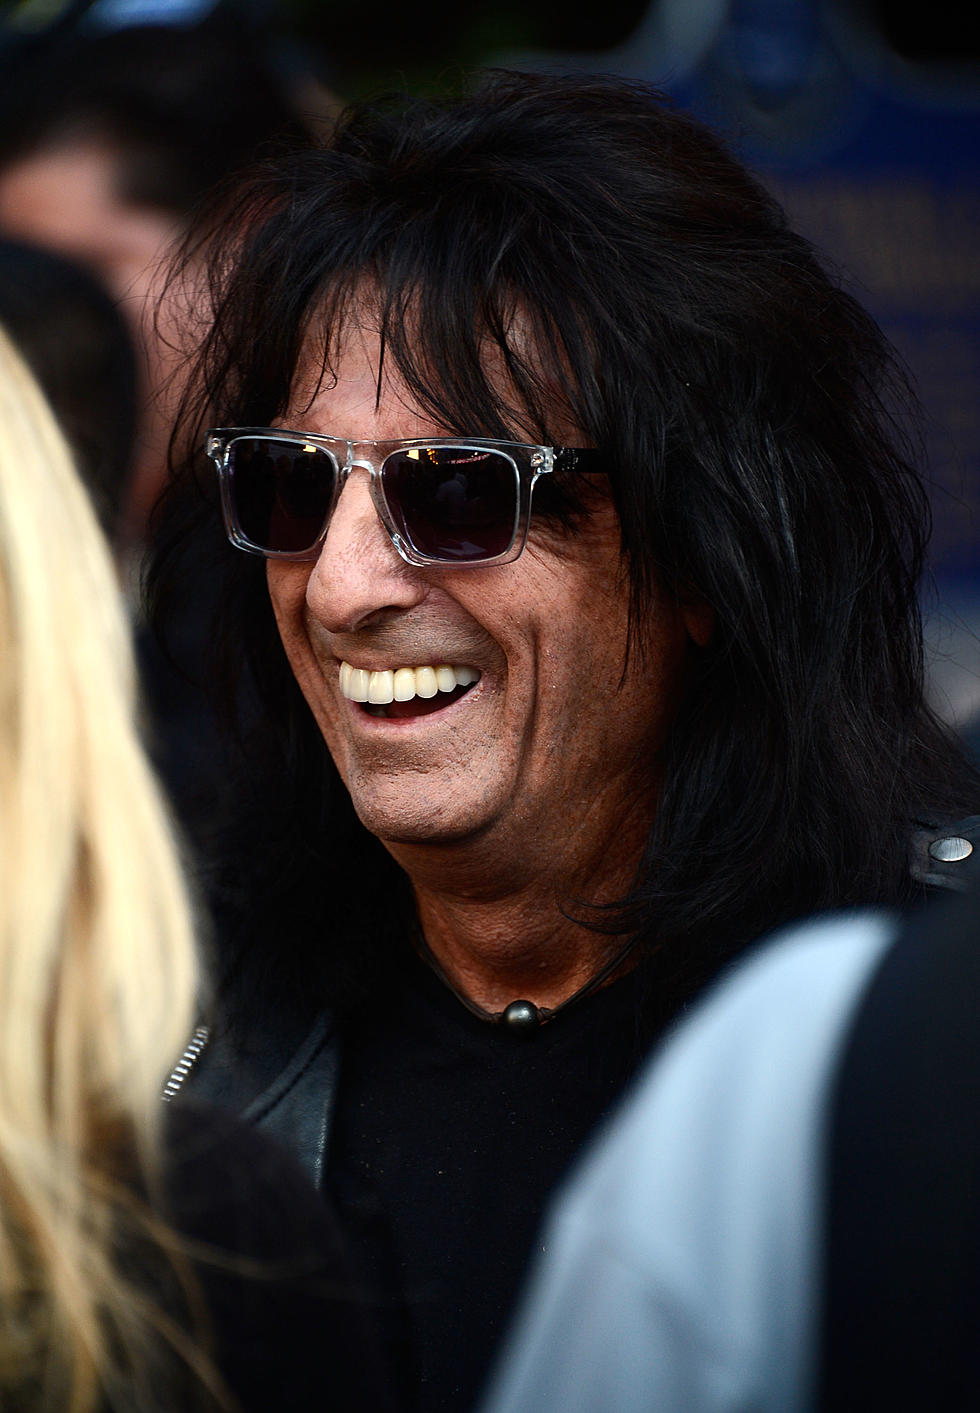 Kelly’s Krazy Kuts: Alice Cooper And ‘School’s Out’ [AUDIO]